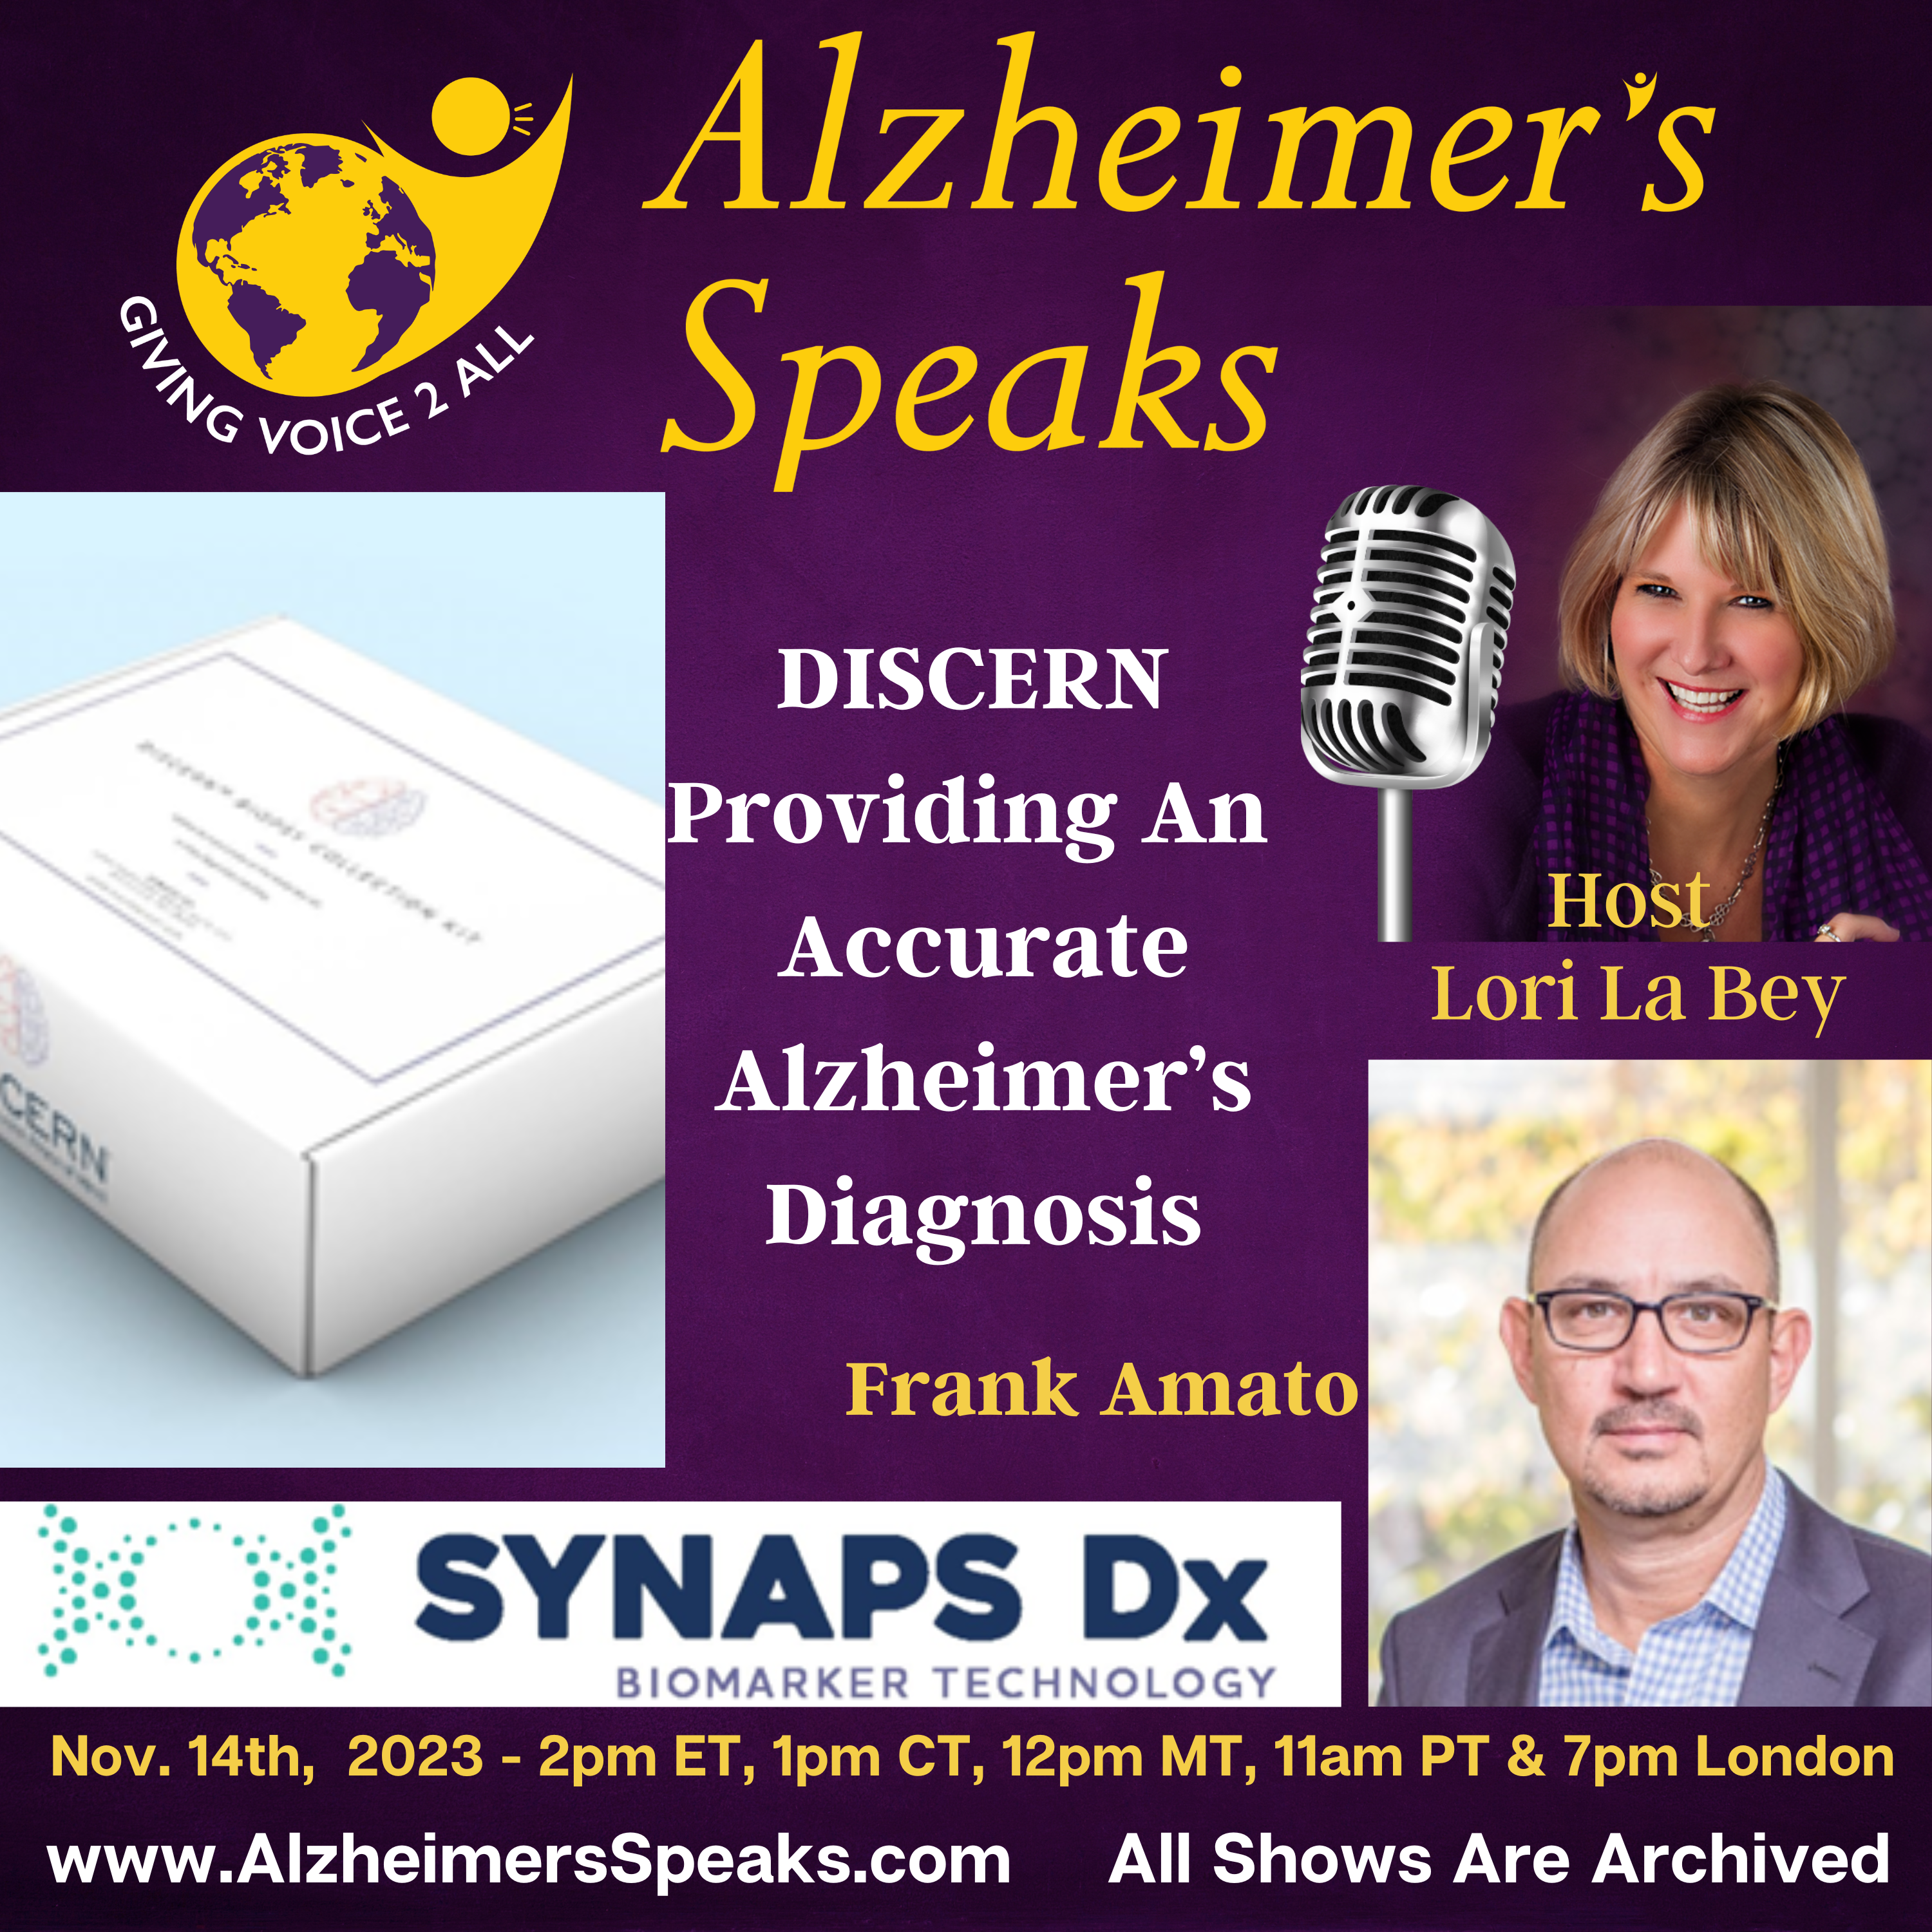 DISCERN™, a highly accurate, minimally invasive test to diagnose Alzheimer’s Disease